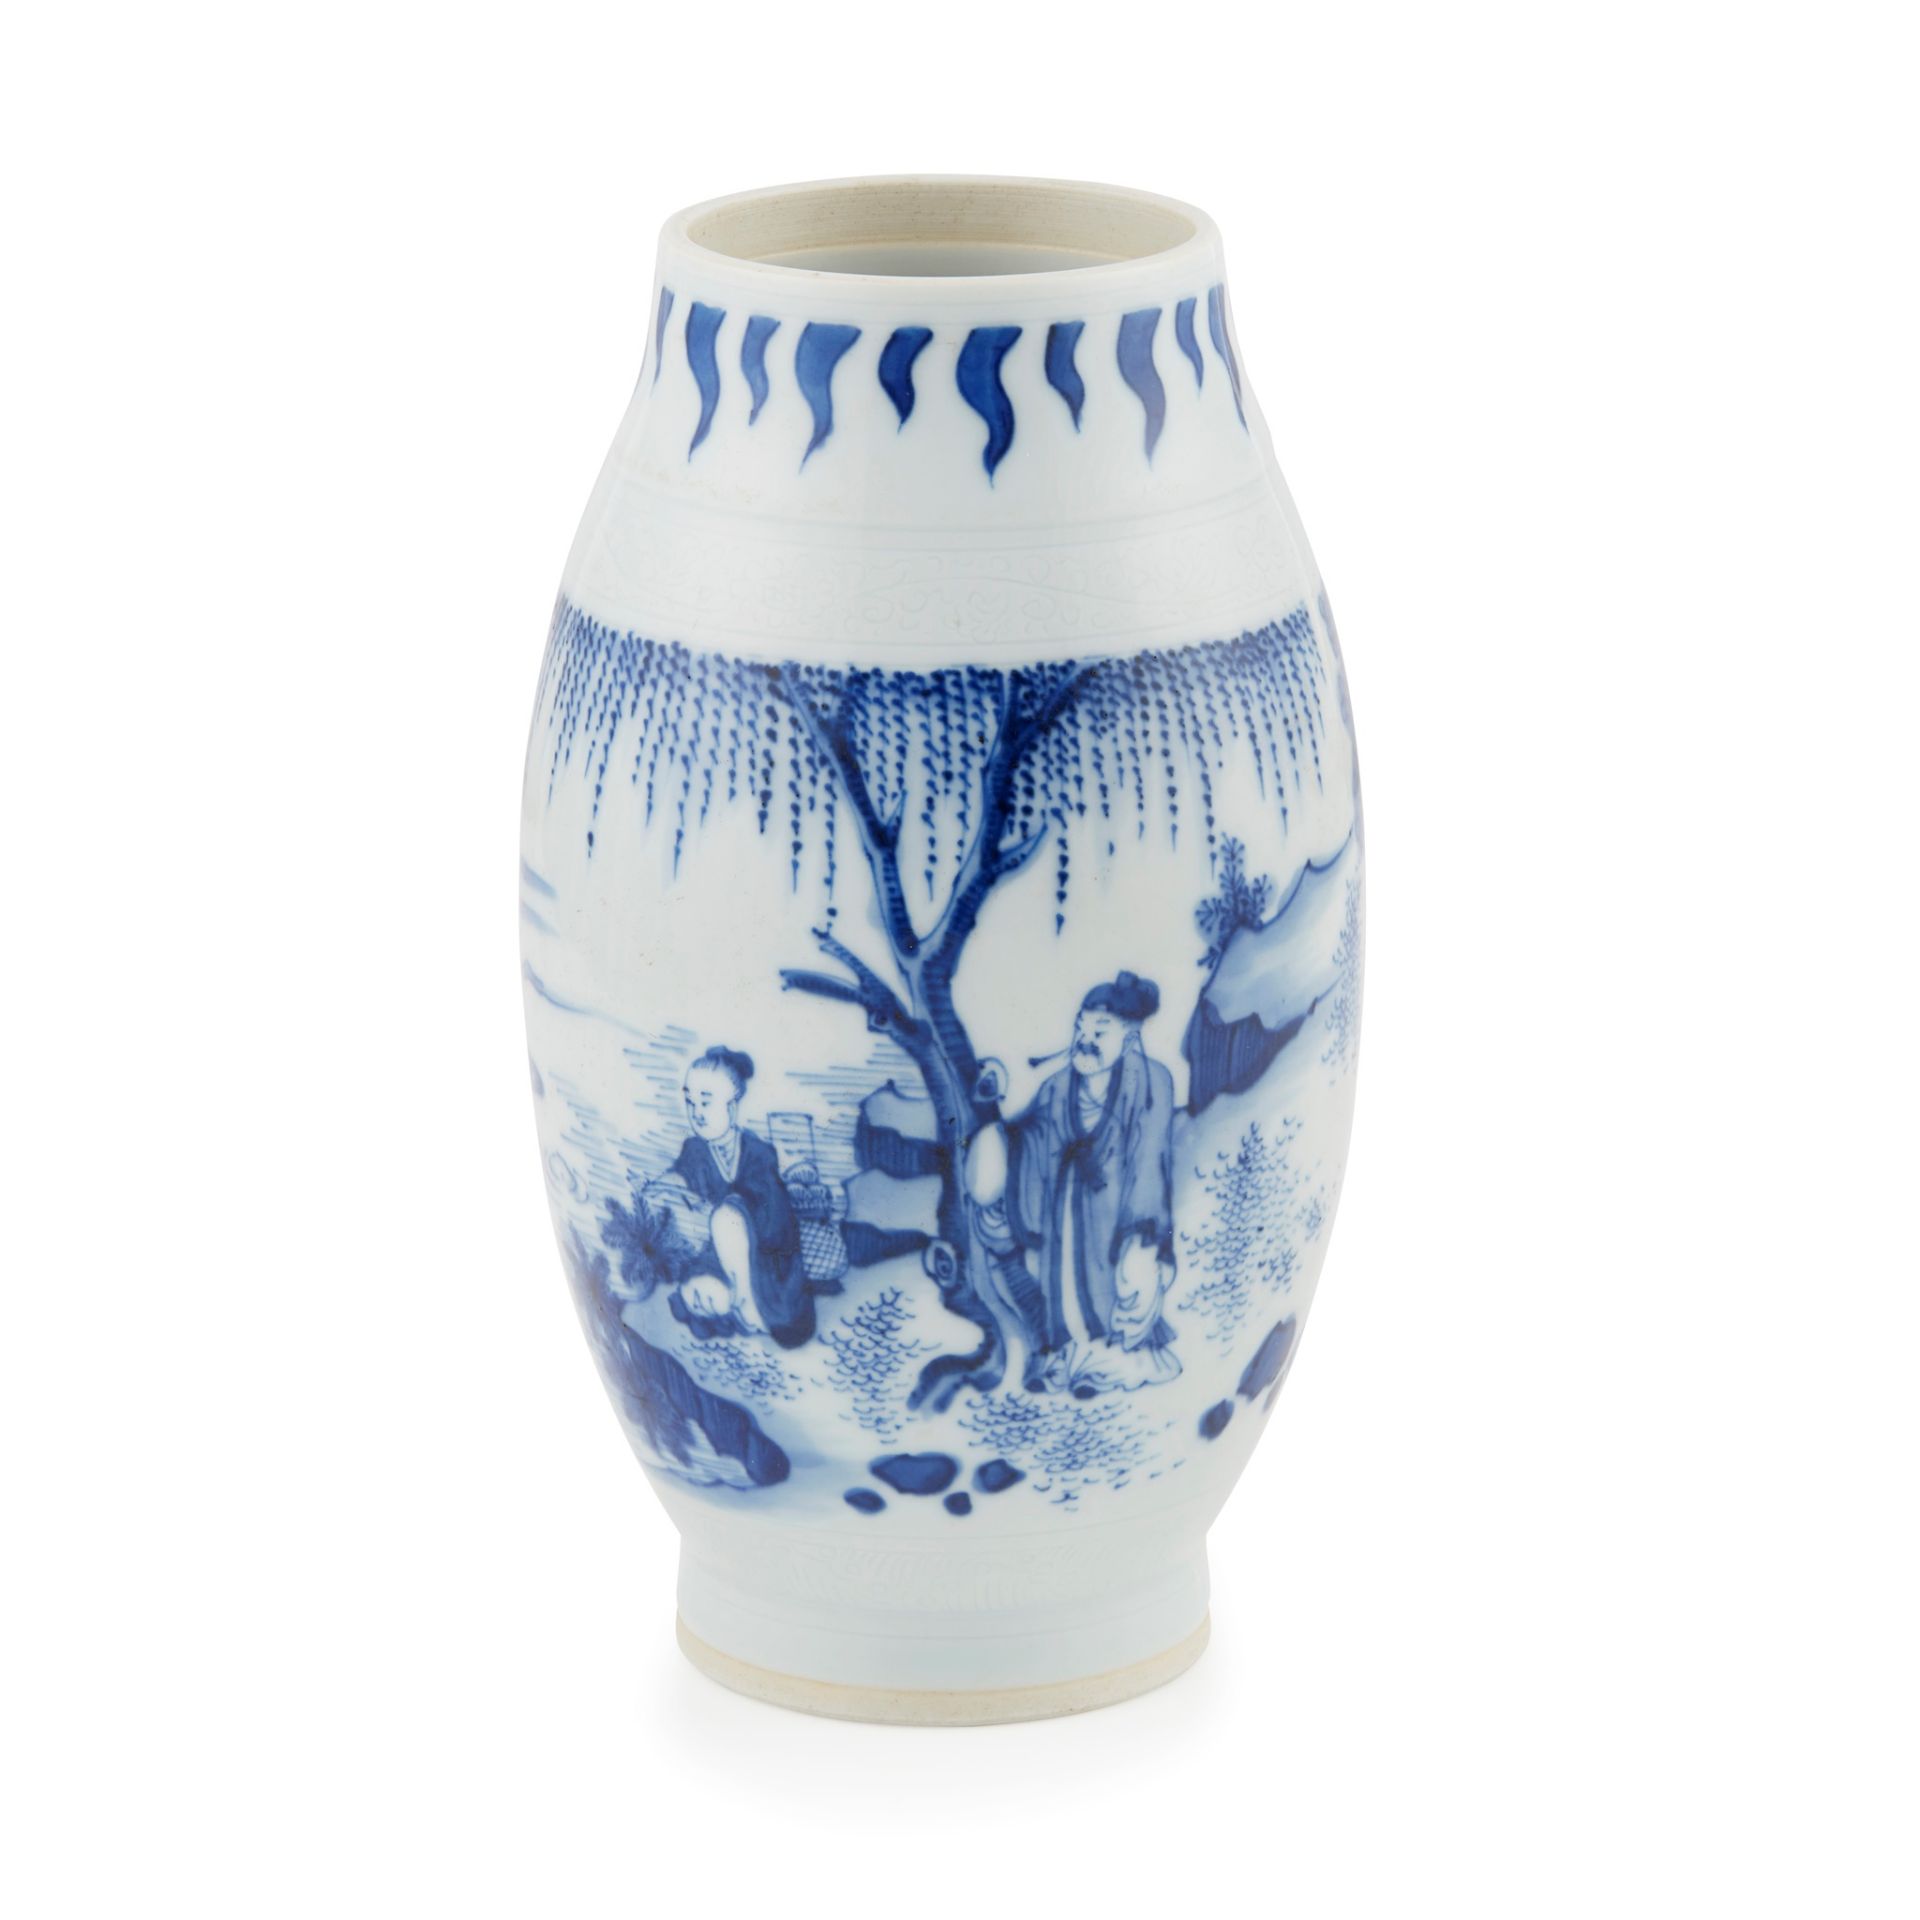 BLUE AND WHITE BALUSTER VASE TRANSITIONAL STYLE